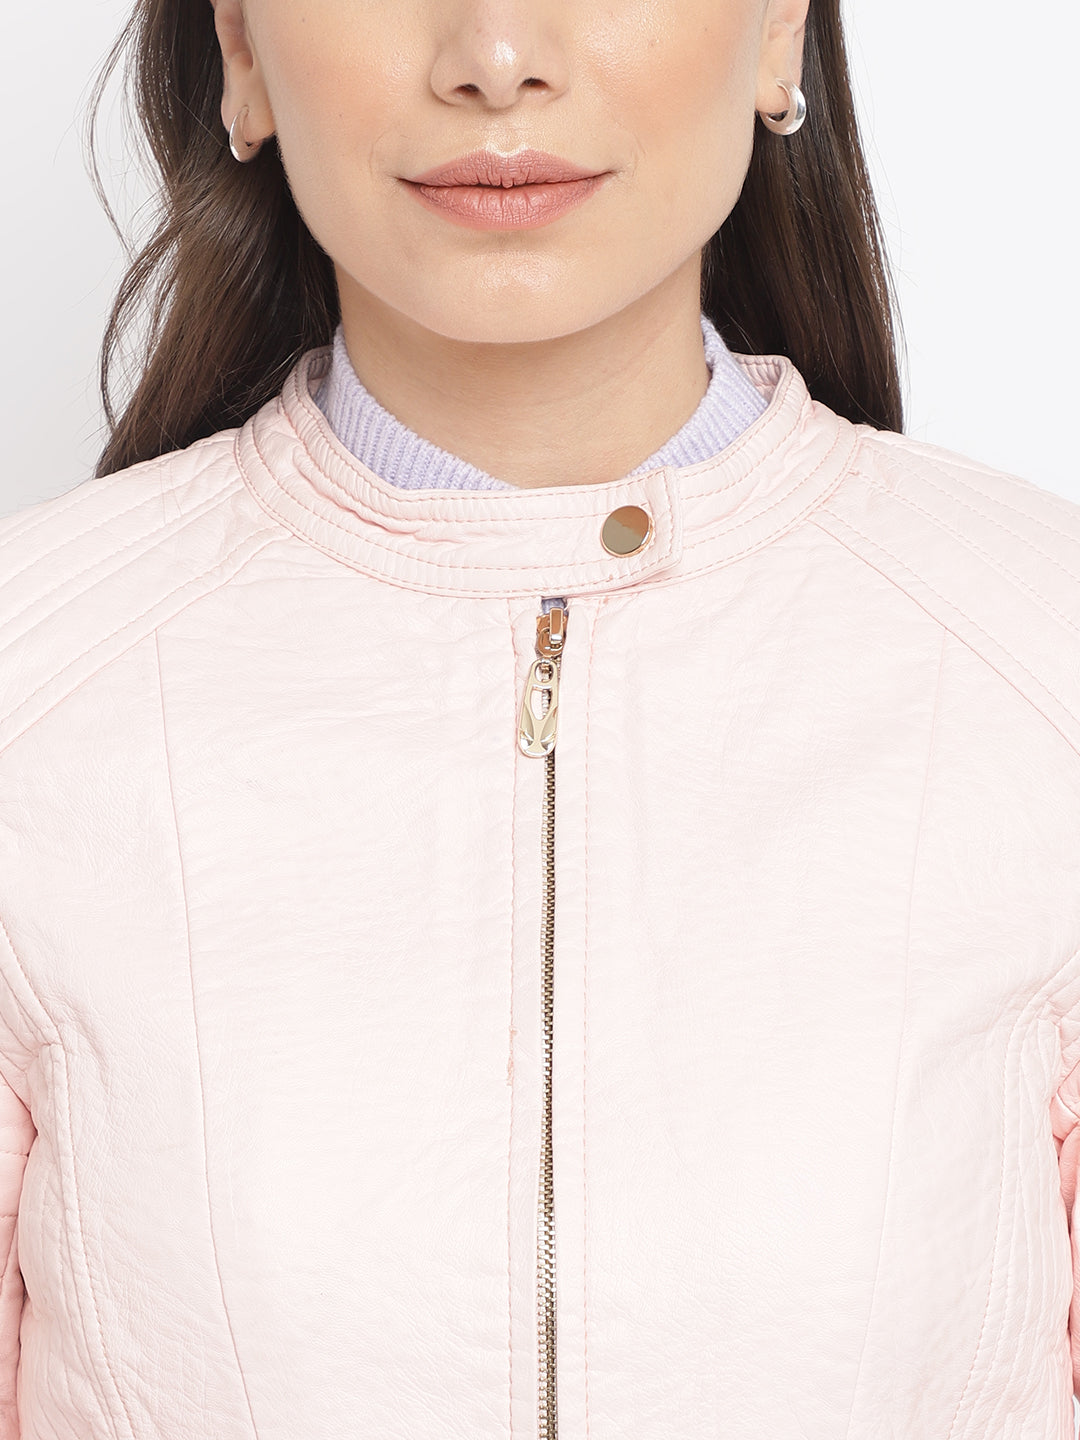 Pink Solid Full Sleeves Leather Jacket